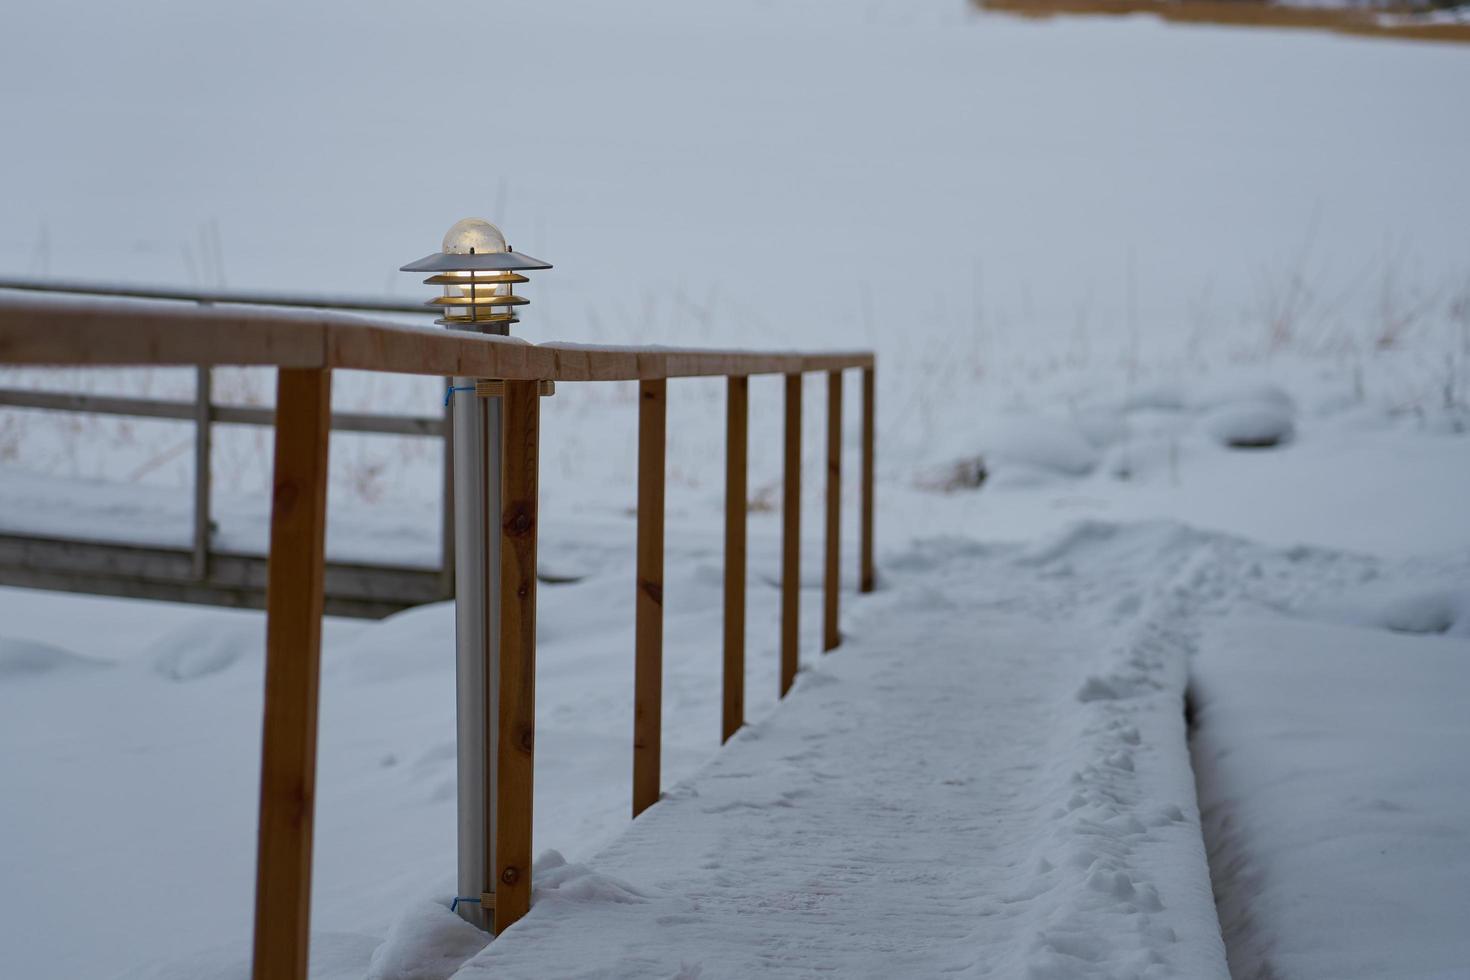 Lantern on a snow-covered path with wooden railings in winter photo